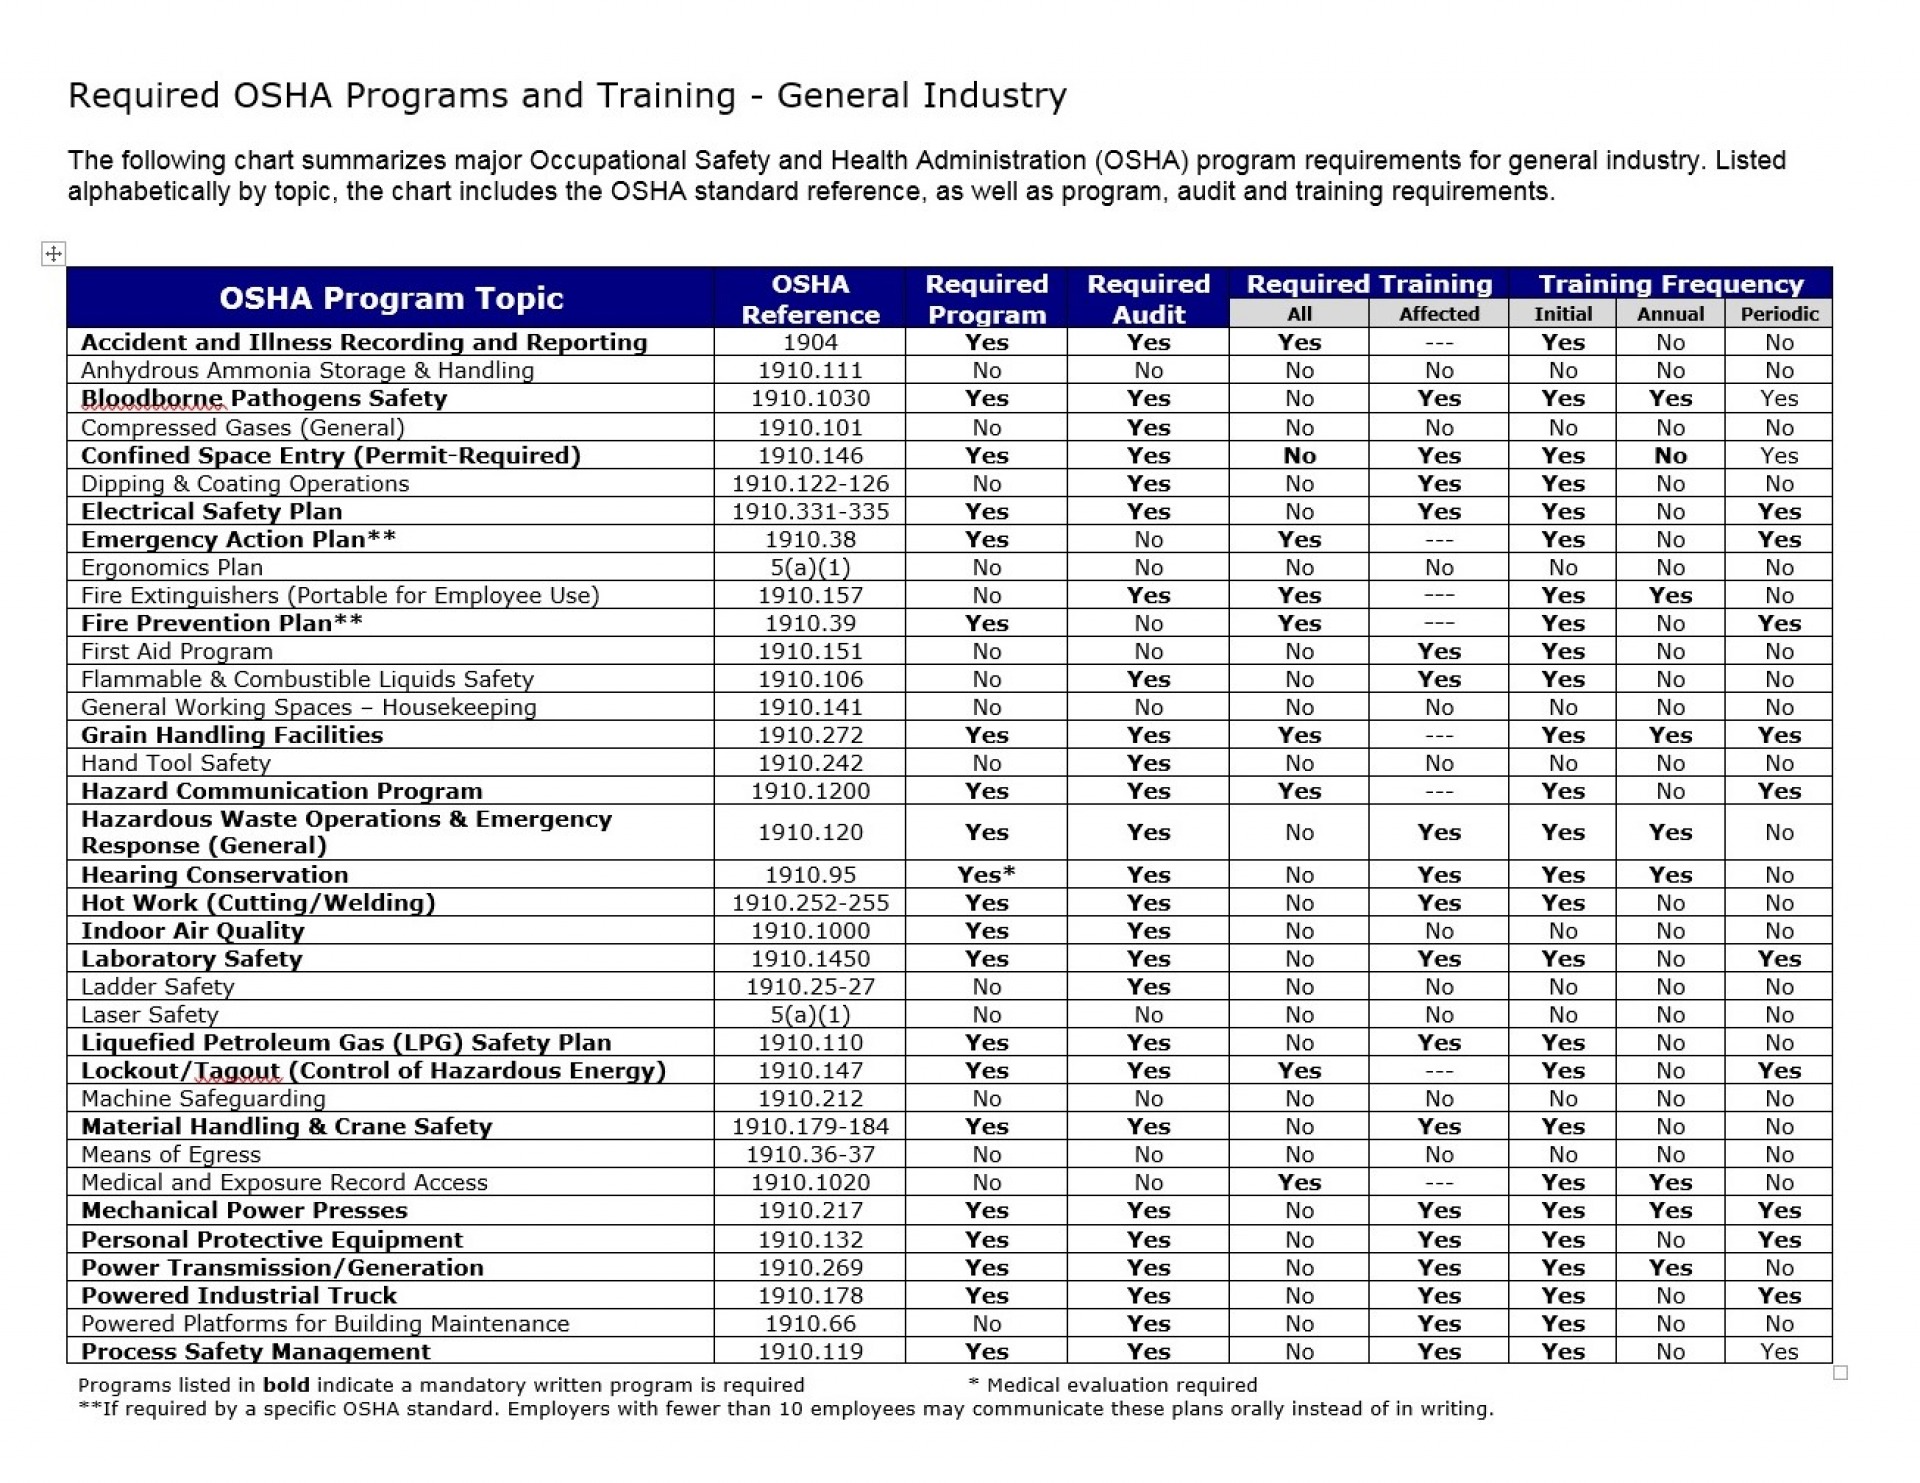 Required OSHA Programs and Training - General Industry table